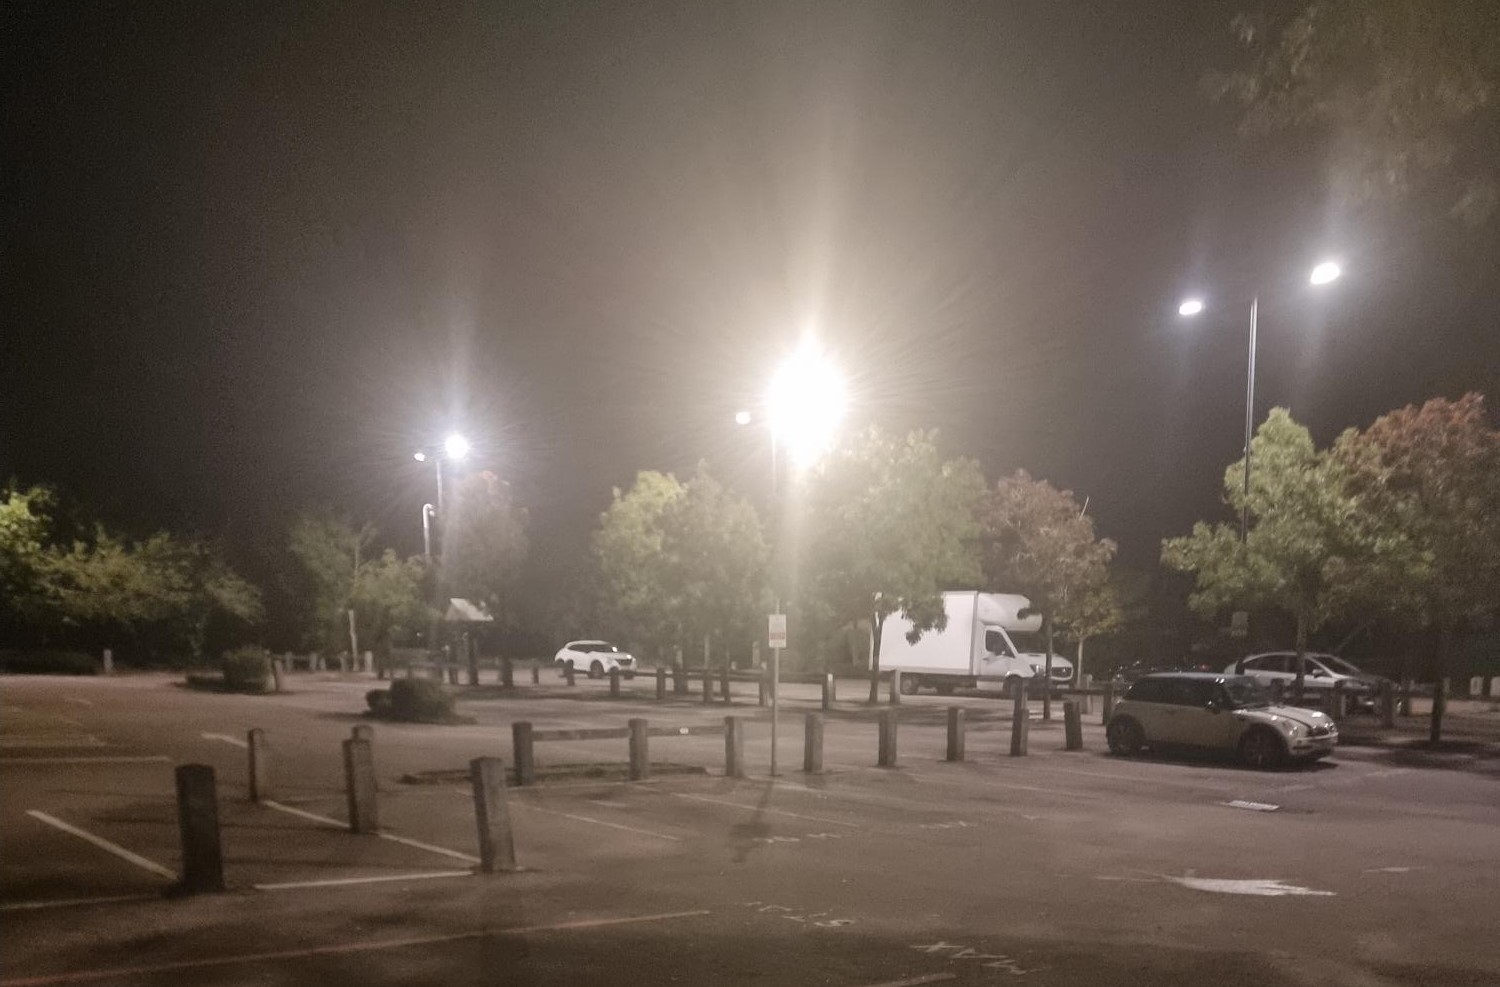 LED street lights in dark car park with cars in the background